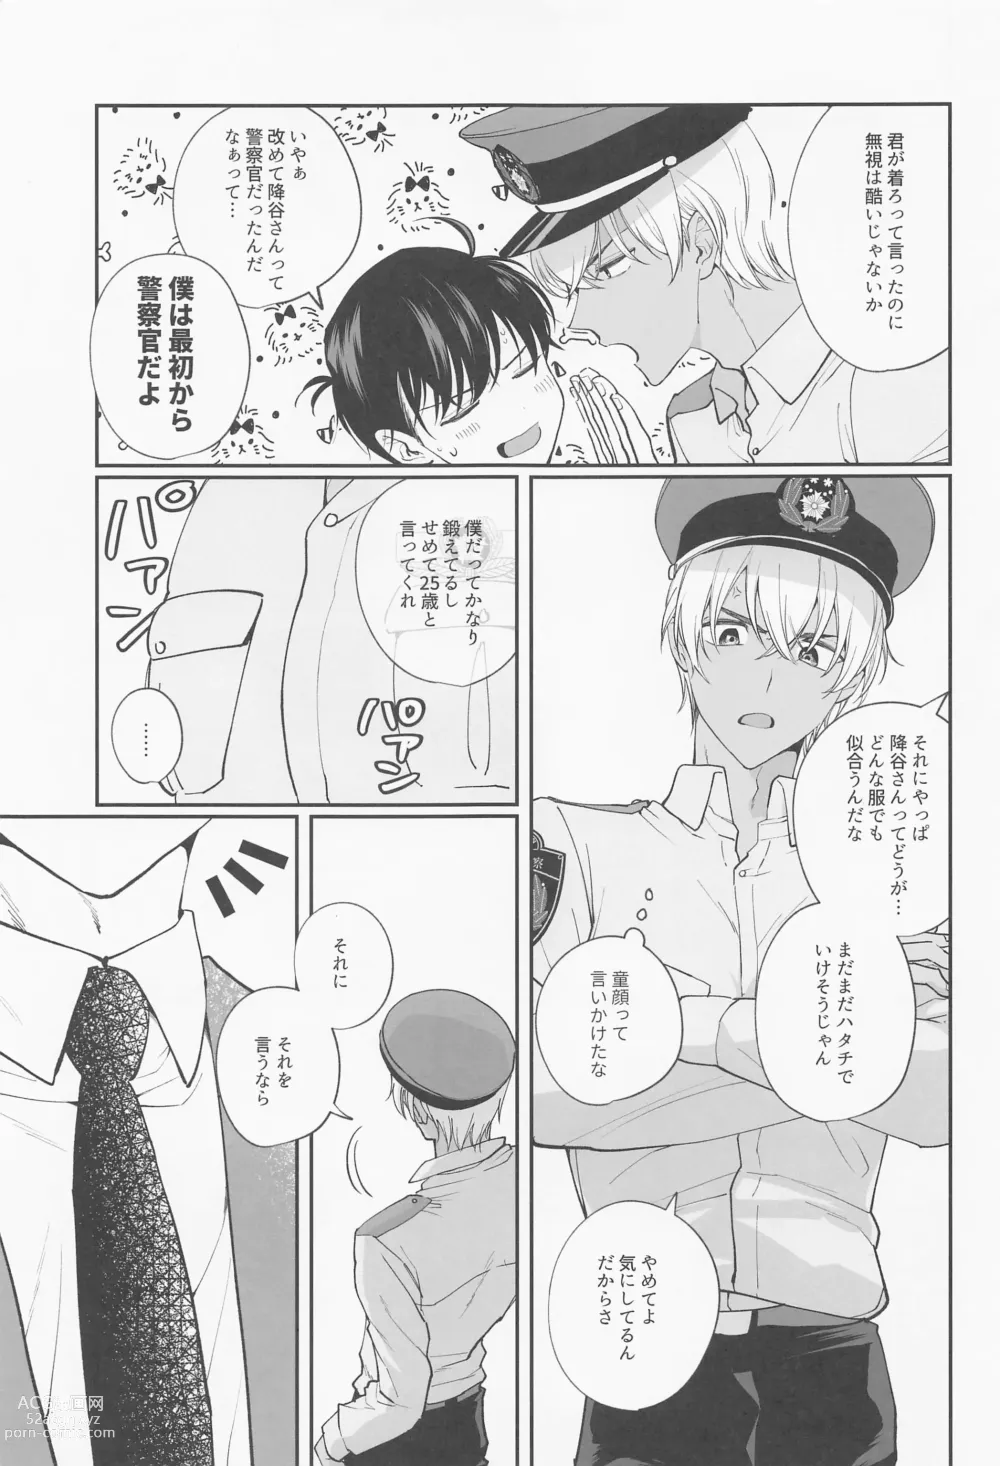 Page 6 of doujinshi Zenbu Ore no Mono - Whats Yours is Mine, and What's Mine is My Own.